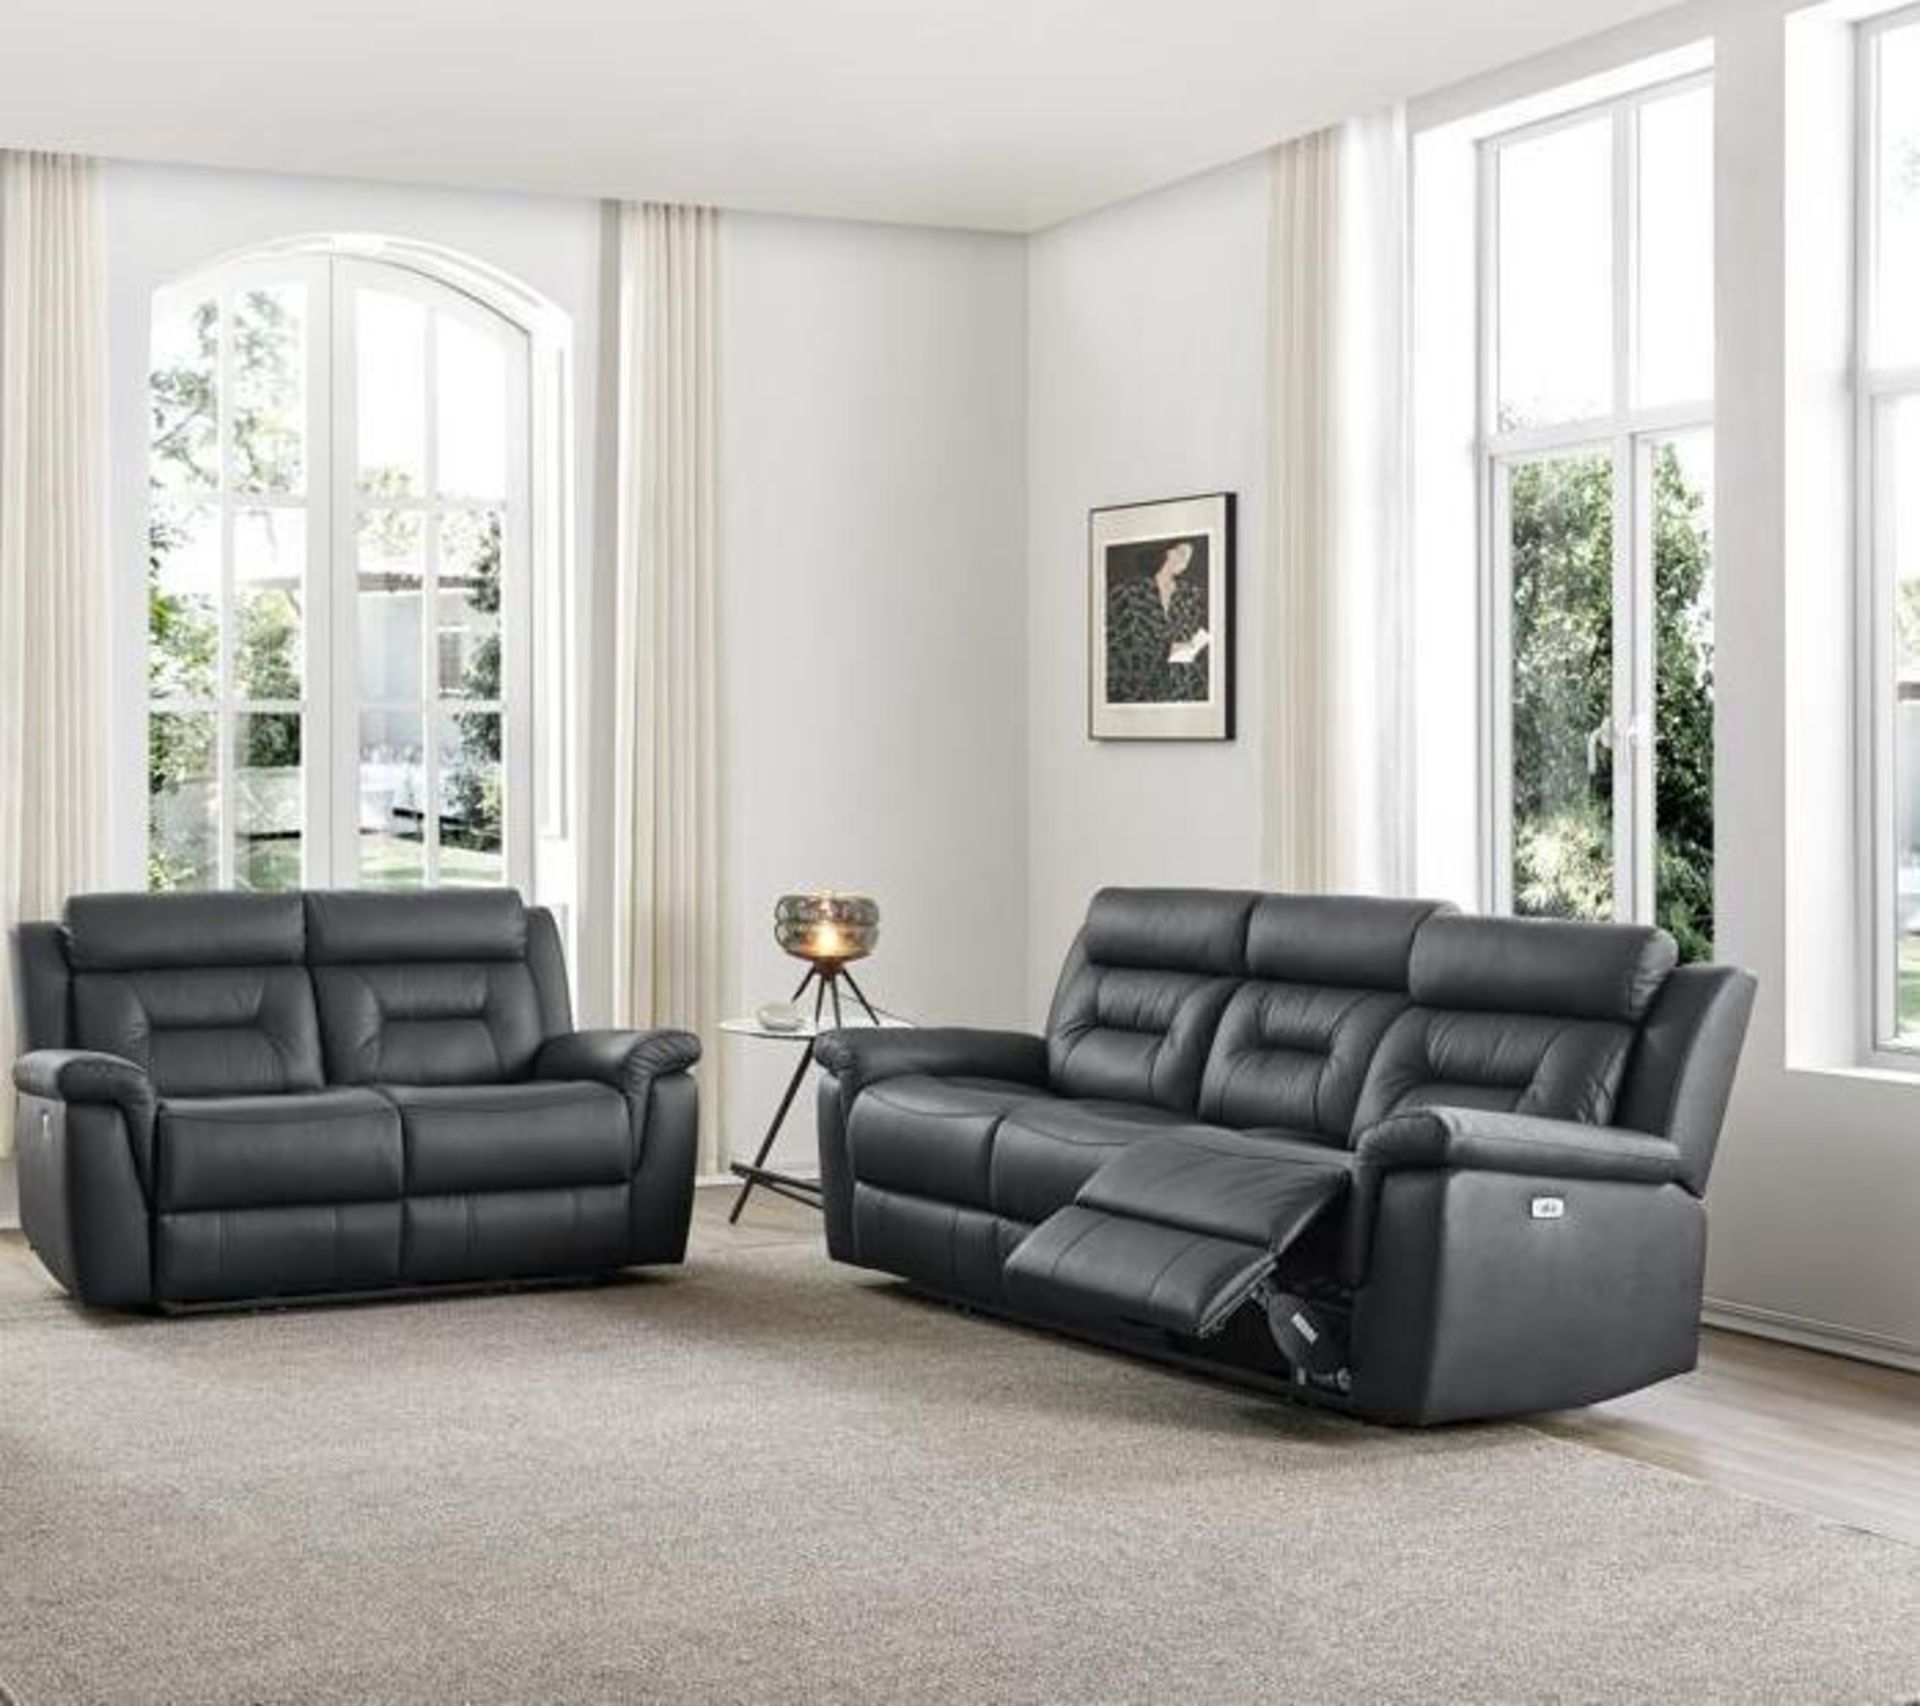 *BRAND NEW* Milan Leather Electric Recliner Collection 3 + 2 in Black.